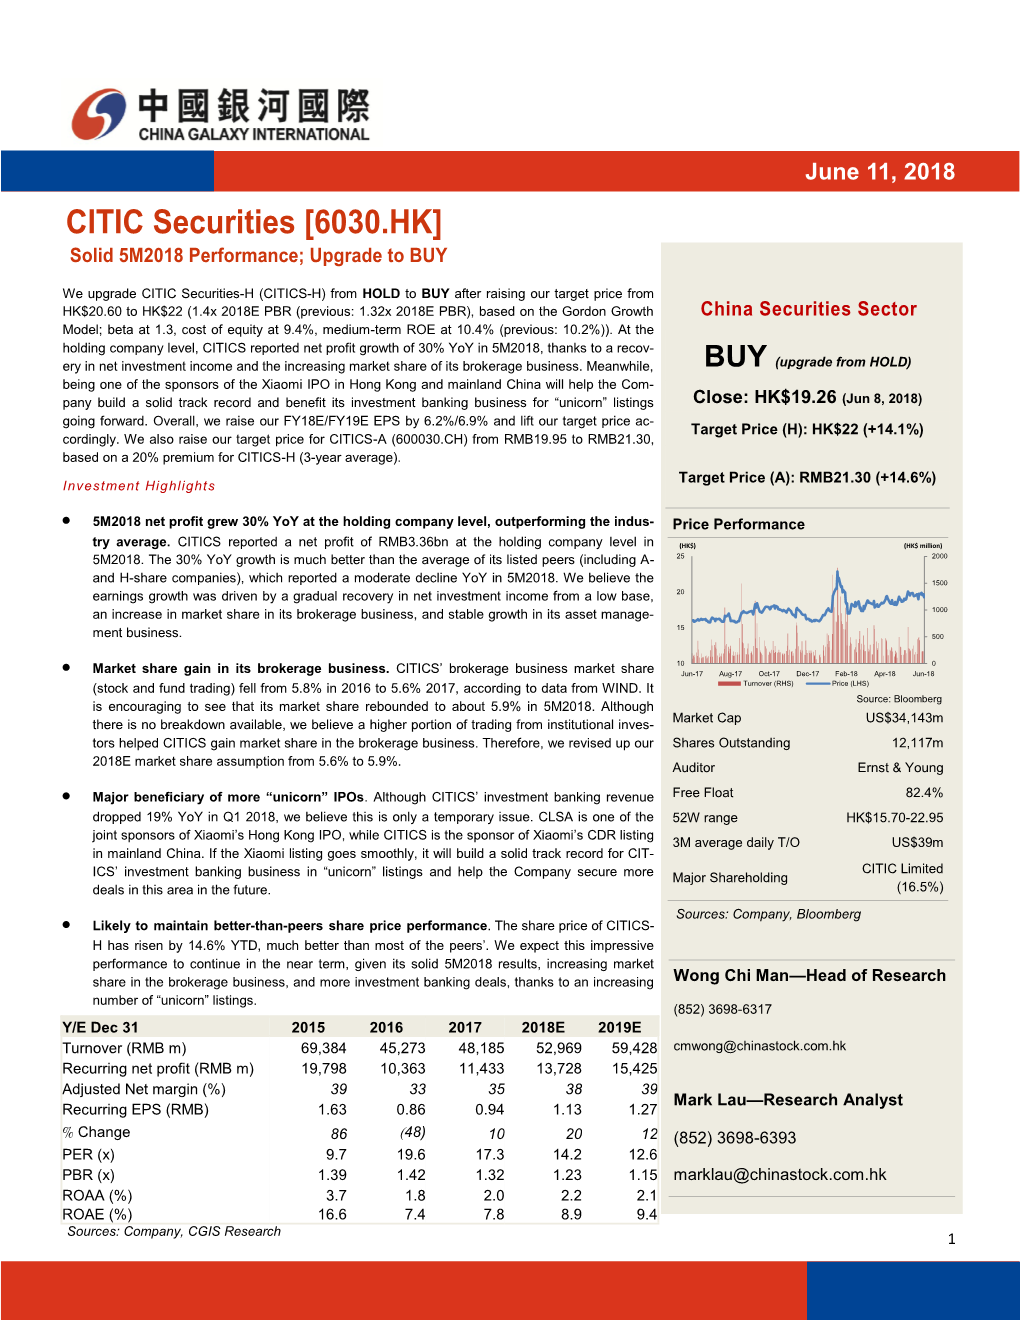 CITIC Securities [6030.HK] Solid 5M2018 Performance; Upgrade to BUY